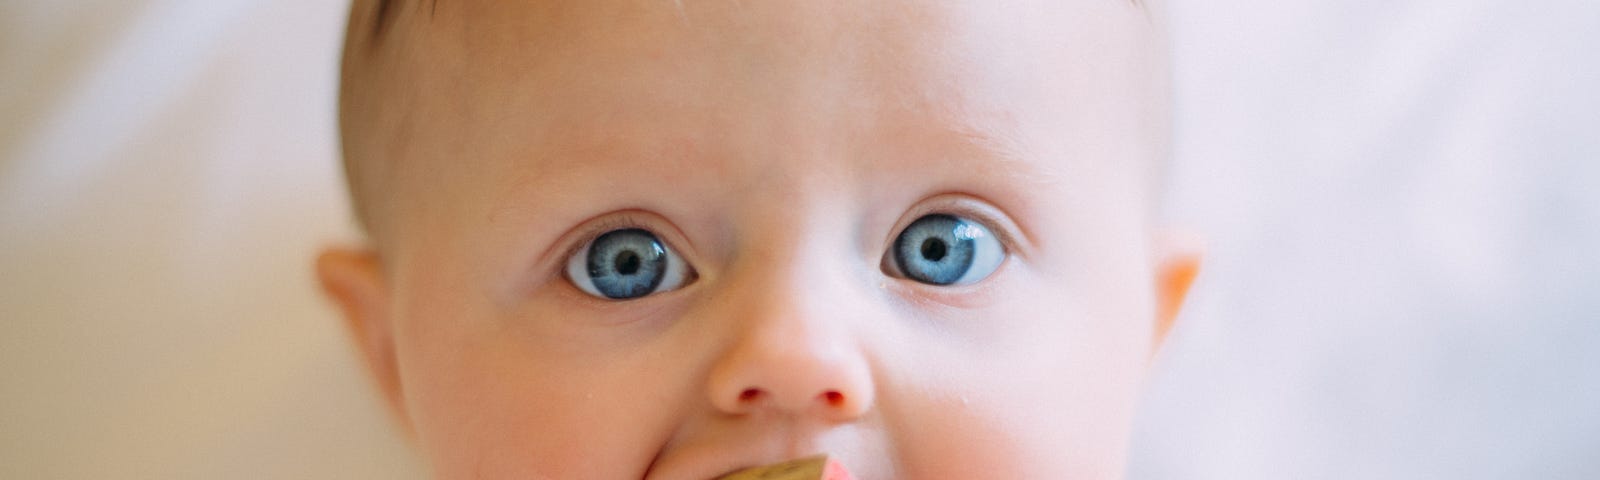 A baby with blue eyes looks at the camera